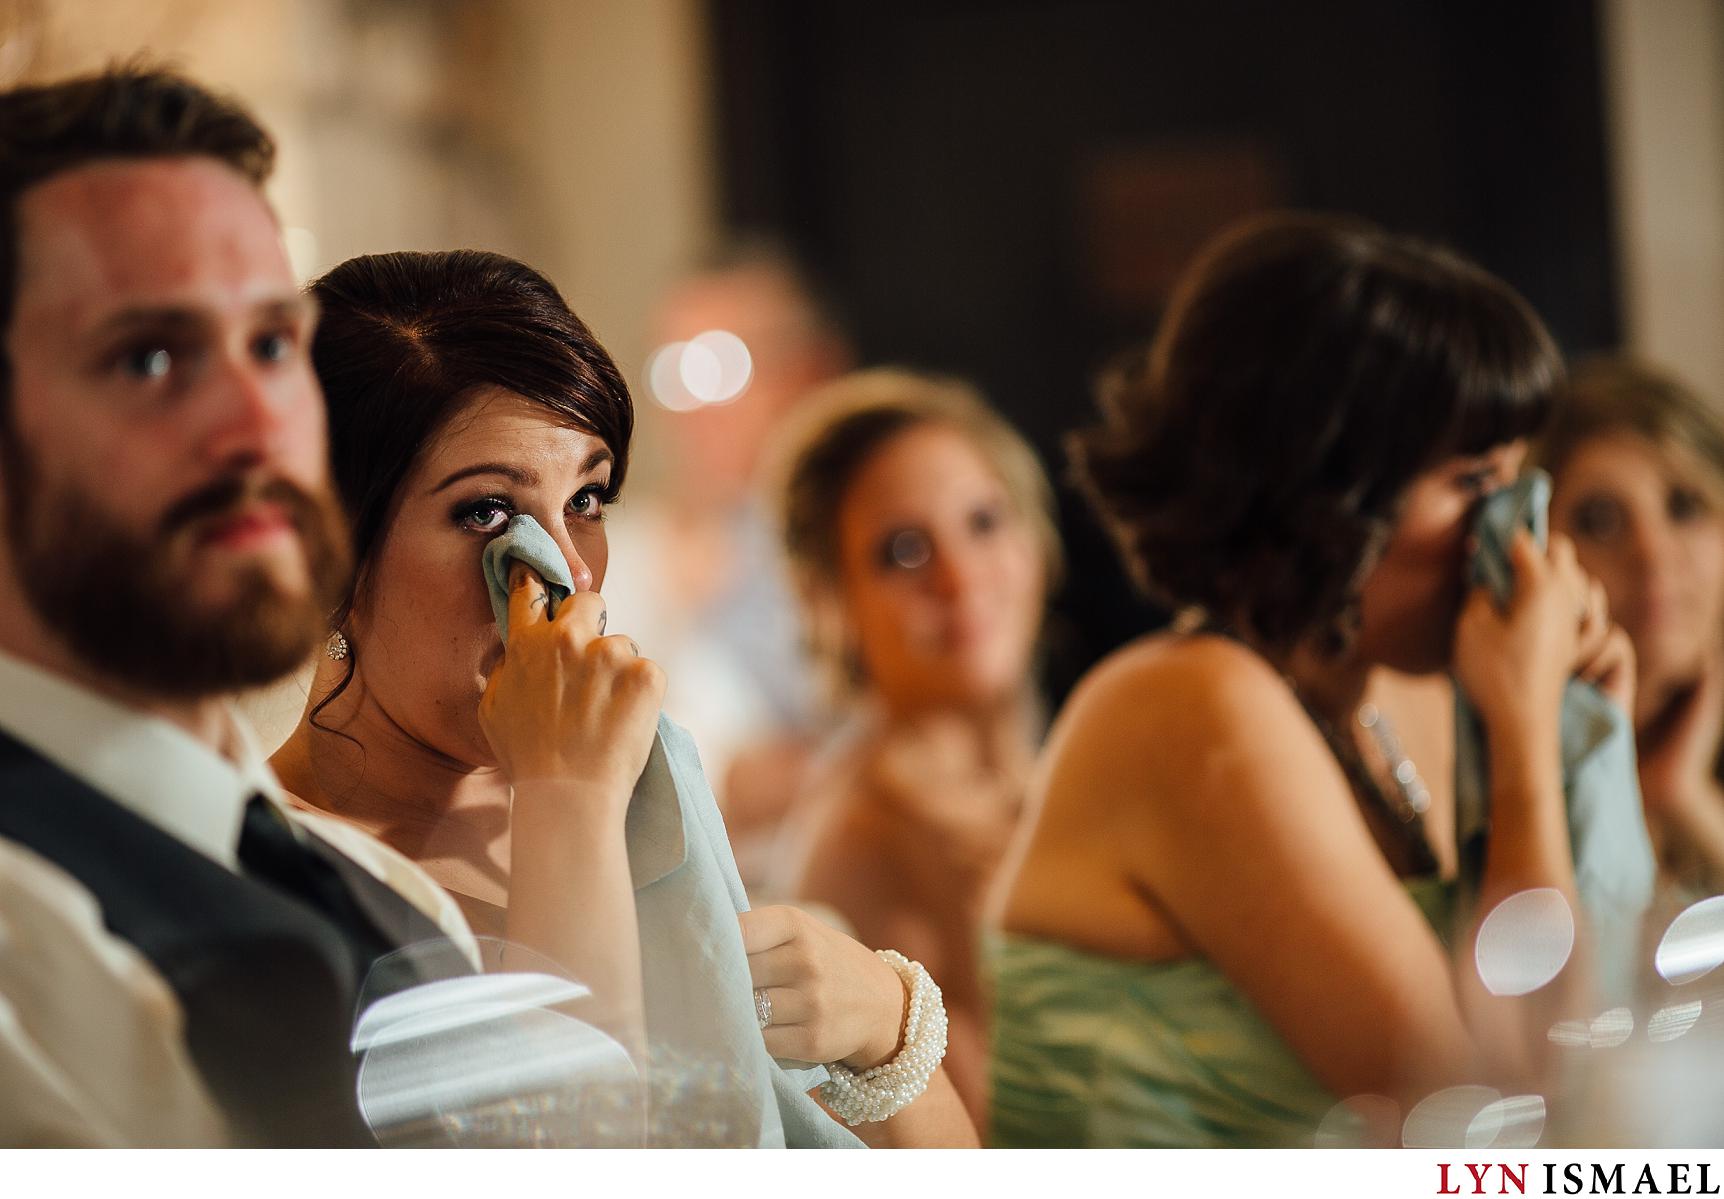 Maid and honour and the bride wipe their tears at the same time at a Waterloo Region wedding.